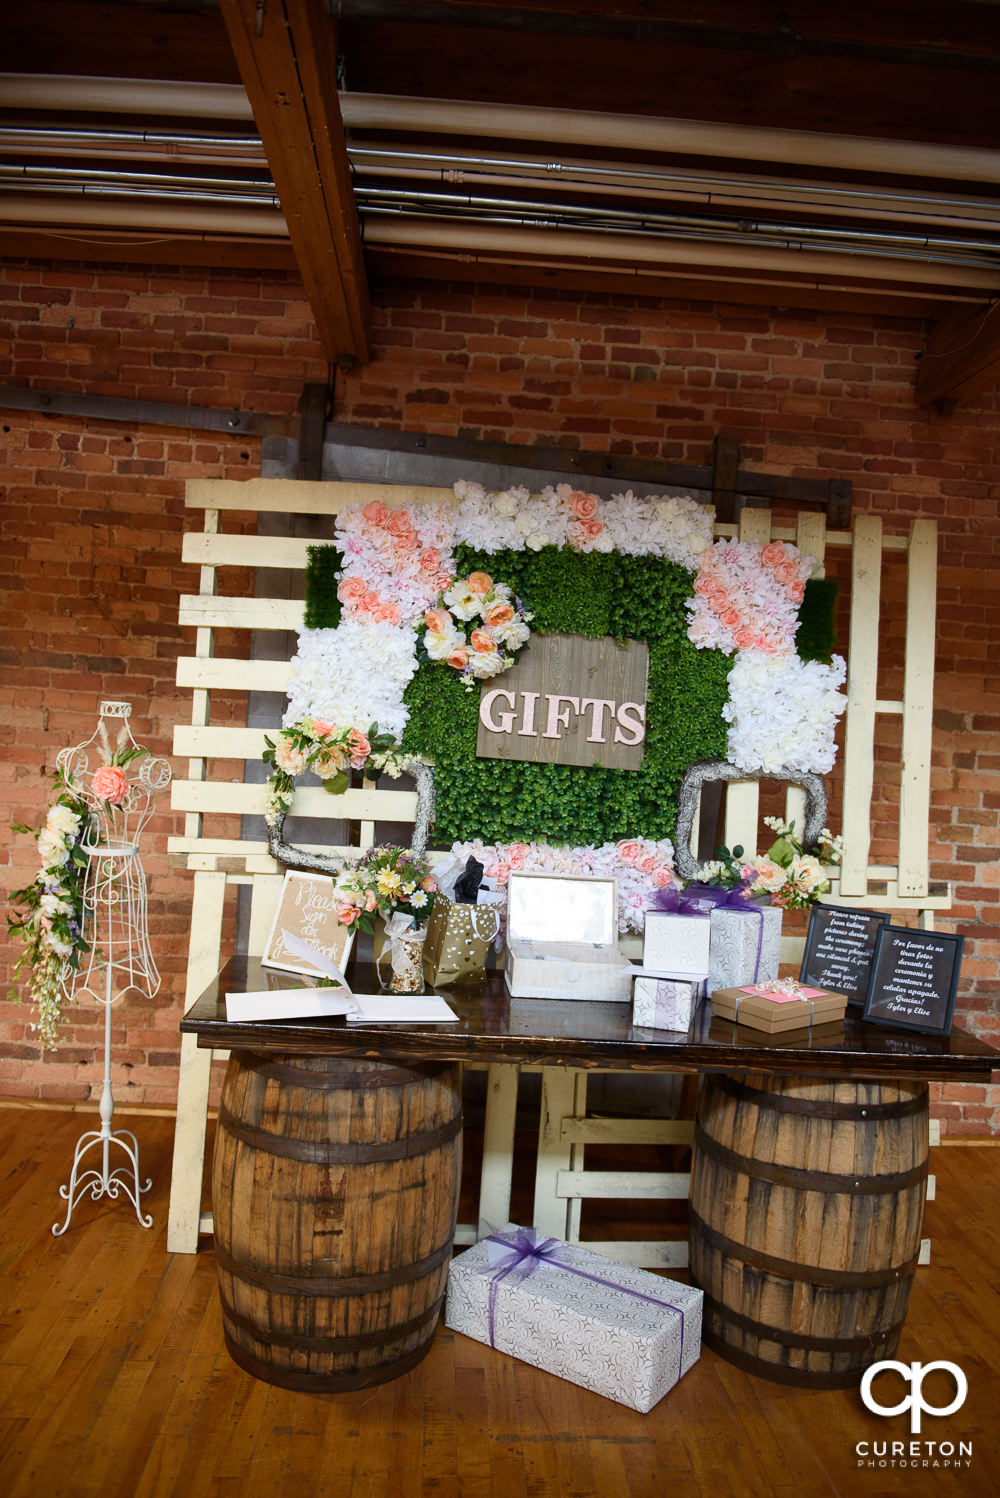 The gift table at the wedding.